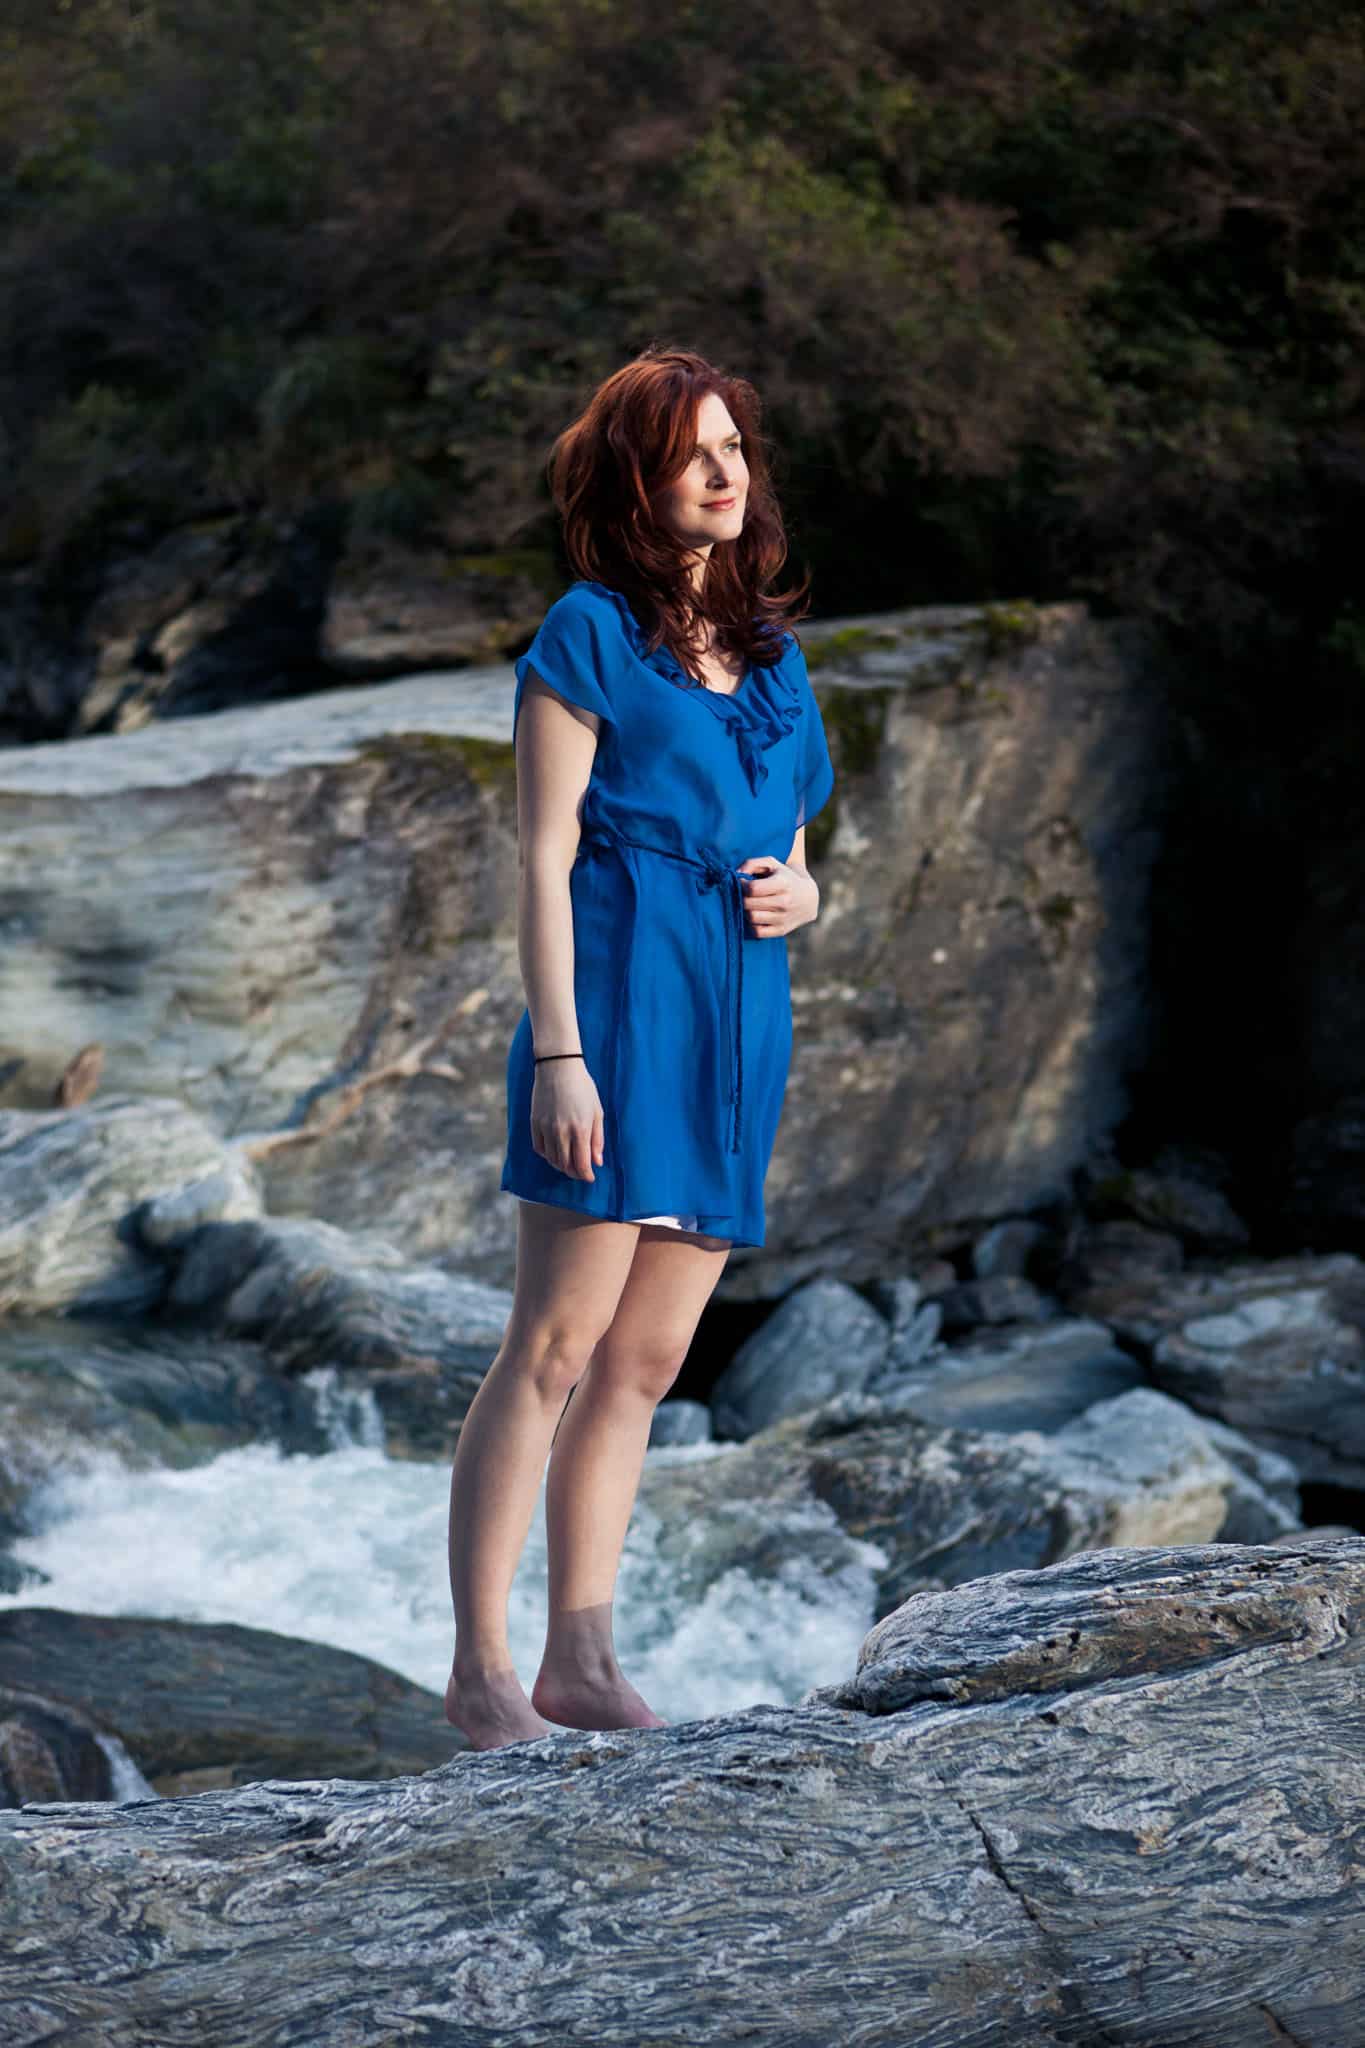 Fashion, lifestyle photography in Queenstown